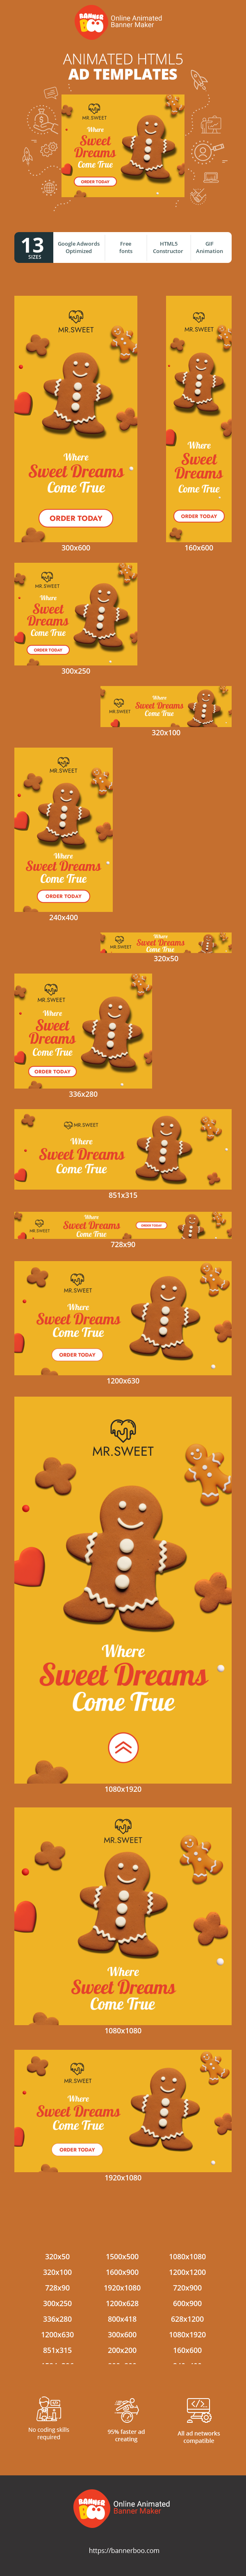 Banner ad template — Where Sweet Dreams Come True — Christmas